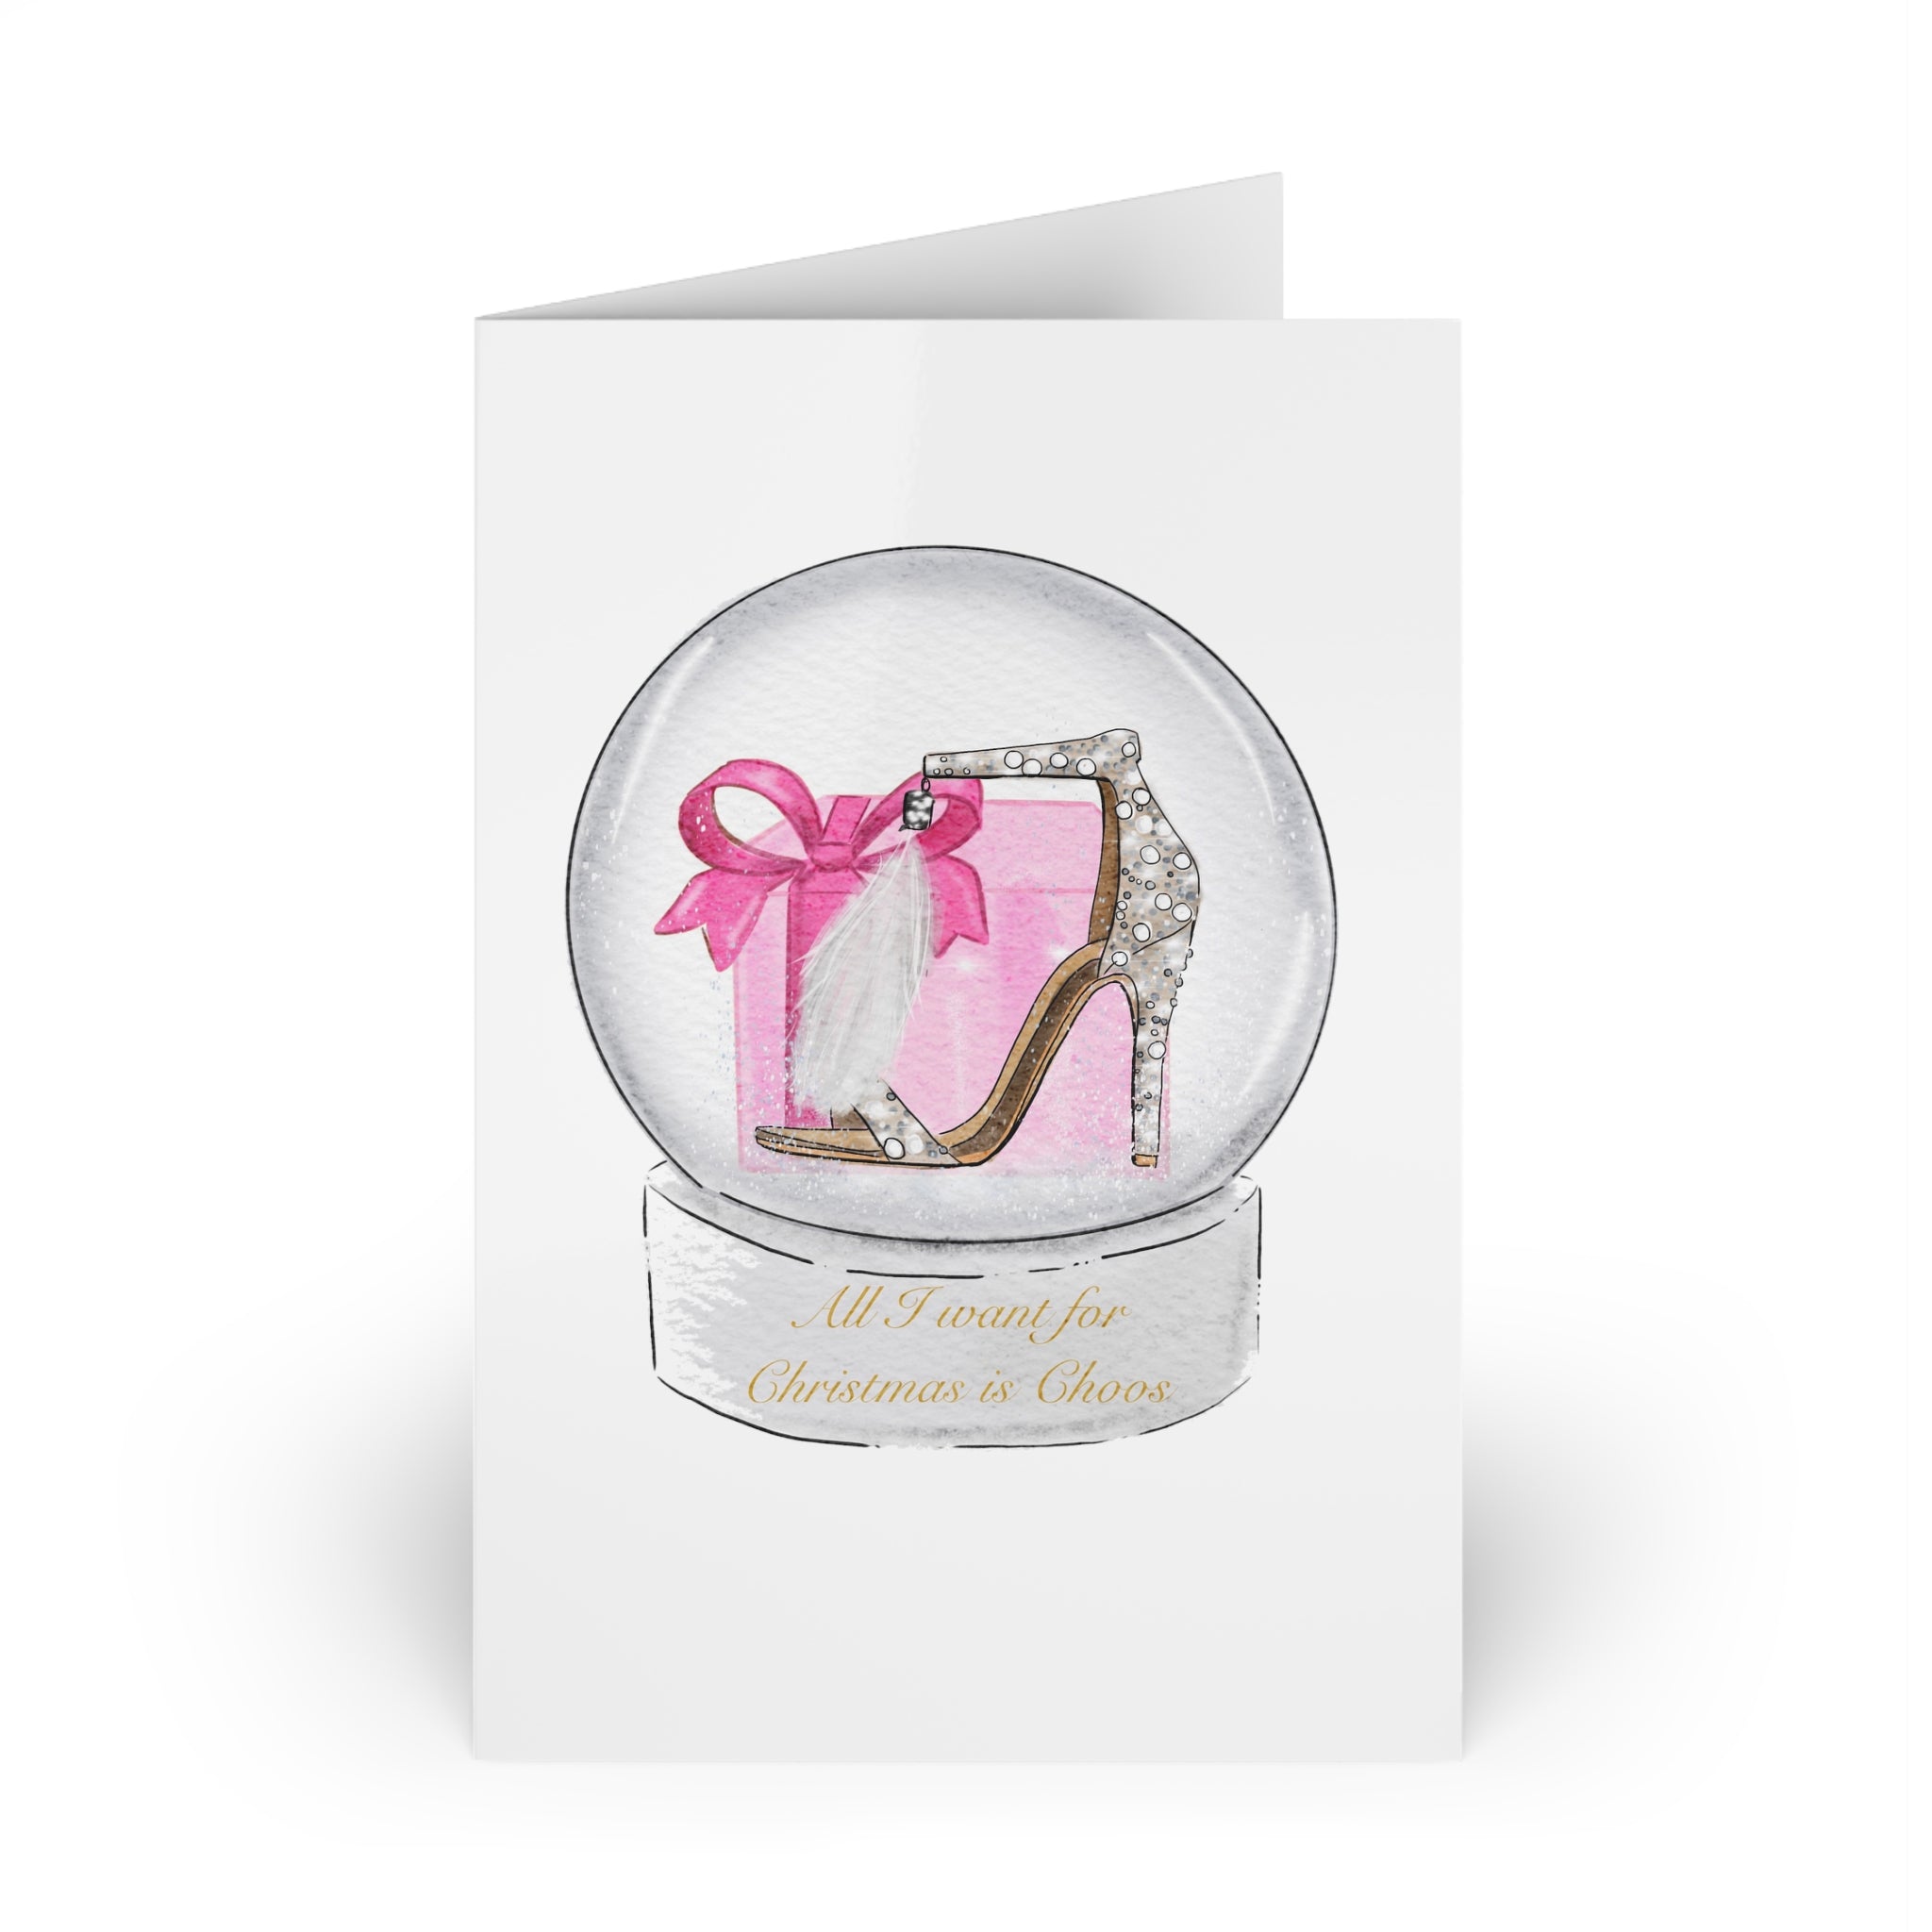 All I want for Christmas is Choos (pink) Greeting Card (5x7 folded)